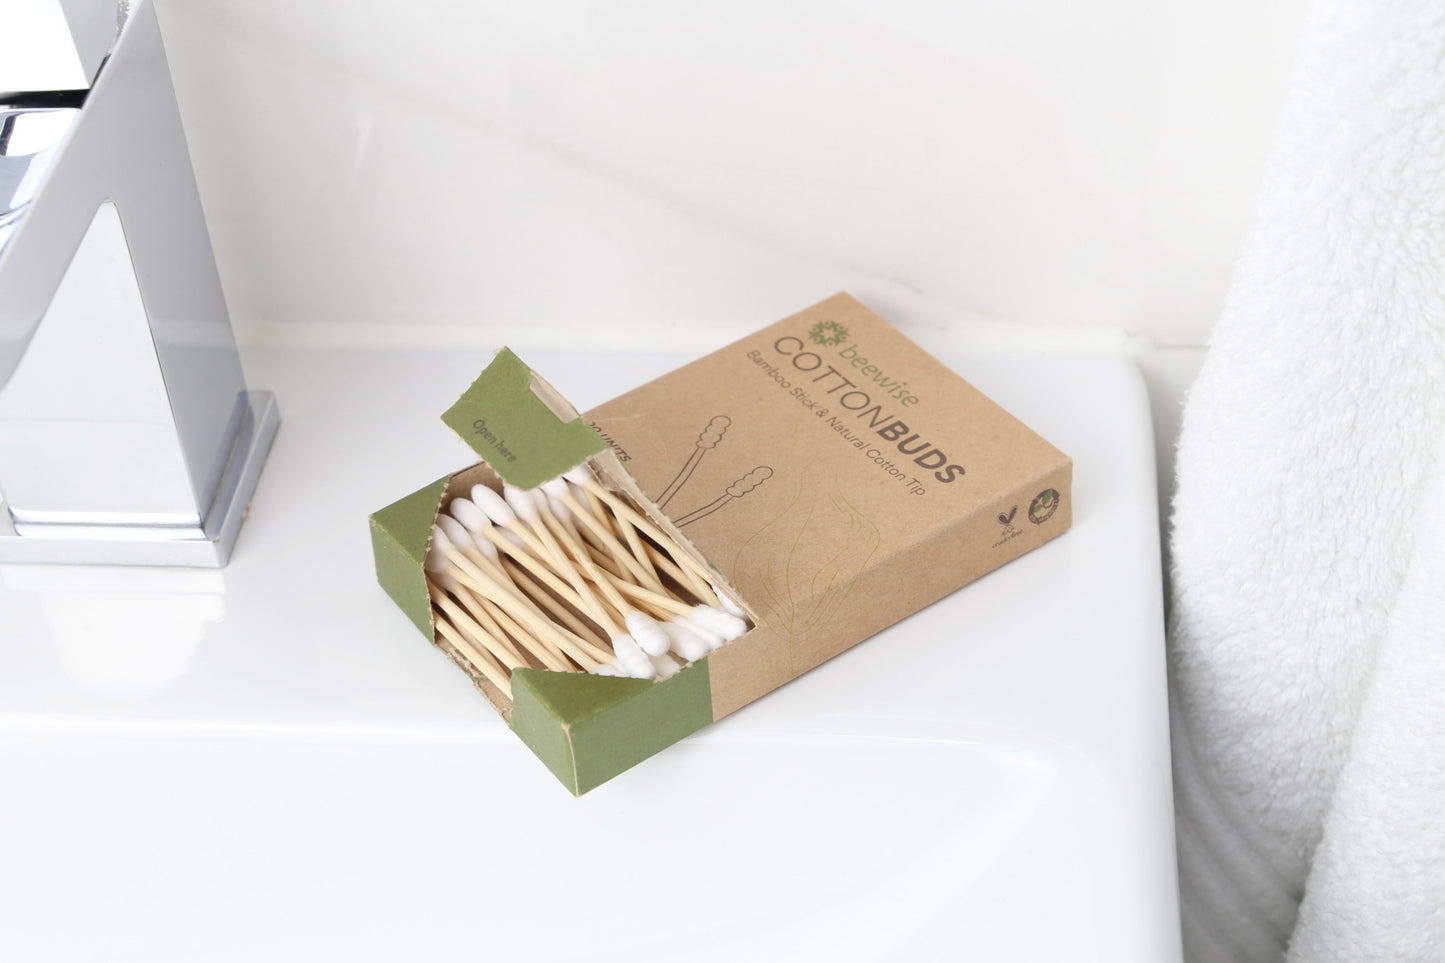 bamboo cotton buds home compostable in a kraft paper packaging from beewise amsterdam in the bathroom sink